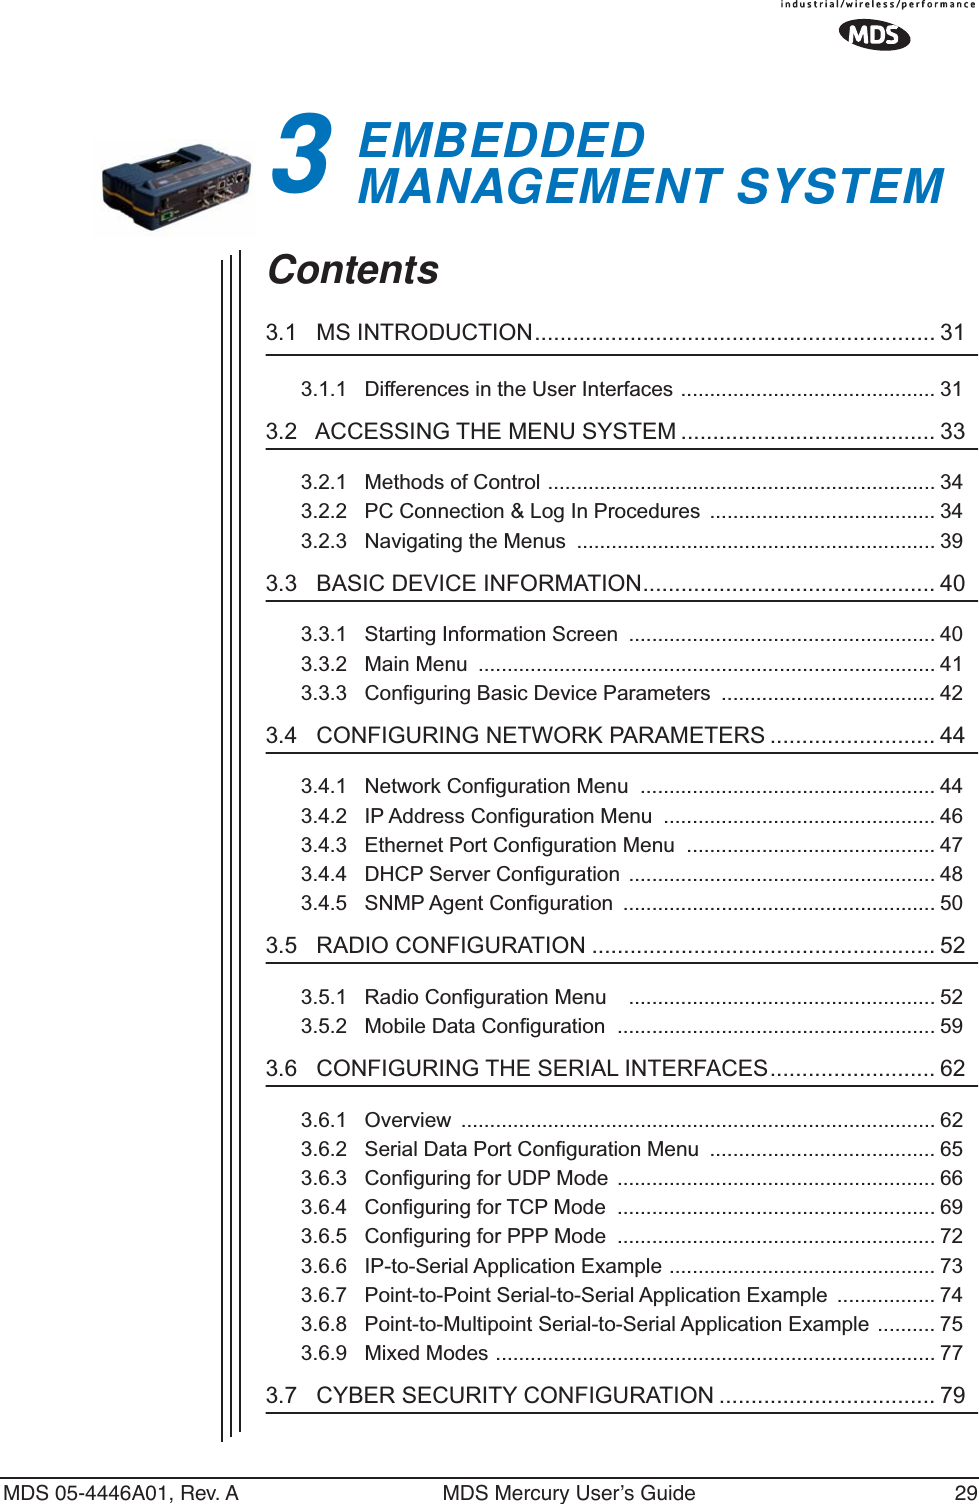 MDS 05-4446A01, Rev. A MDS Mercury User’s Guide 293EMBEDDED MANAGEMENT SYSTEM3 Chapter Counter Reset ParagraphContents3.1   MS INTRODUCTION............................................................... 313.1.1   Differences in the User Interfaces ............................................ 313.2   ACCESSING THE MENU SYSTEM ........................................ 333.2.1   Methods of Control ................................................................... 343.2.2   PC Connection &amp; Log In Procedures  ....................................... 343.2.3   Navigating the Menus  .............................................................. 393.3   BASIC DEVICE INFORMATION.............................................. 403.3.1   Starting Information Screen  ..................................................... 403.3.2   Main Menu  ............................................................................... 413.3.3   Configuring Basic Device Parameters  ..................................... 423.4   CONFIGURING NETWORK PARAMETERS .......................... 443.4.1   Network Configuration Menu  ................................................... 443.4.2   IP Address Configuration Menu  ............................................... 463.4.3   Ethernet Port Configuration Menu  ........................................... 473.4.4   DHCP Server Configuration ..................................................... 483.4.5   SNMP Agent Configuration  ...................................................... 503.5   RADIO CONFIGURATION ...................................................... 523.5.1   Radio Configuration Menu    ..................................................... 523.5.2   Mobile Data Configuration  ....................................................... 593.6   CONFIGURING THE SERIAL INTERFACES.......................... 623.6.1   Overview  .................................................................................. 623.6.2   Serial Data Port Configuration Menu  ....................................... 653.6.3   Configuring for UDP Mode ....................................................... 663.6.4   Configuring for TCP Mode  ....................................................... 693.6.5   Configuring for PPP Mode  ....................................................... 723.6.6   IP-to-Serial Application Example .............................................. 733.6.7   Point-to-Point Serial-to-Serial Application Example  ................. 743.6.8   Point-to-Multipoint Serial-to-Serial Application Example .......... 753.6.9   Mixed Modes ............................................................................ 773.7   CYBER SECURITY CONFIGURATION .................................. 79